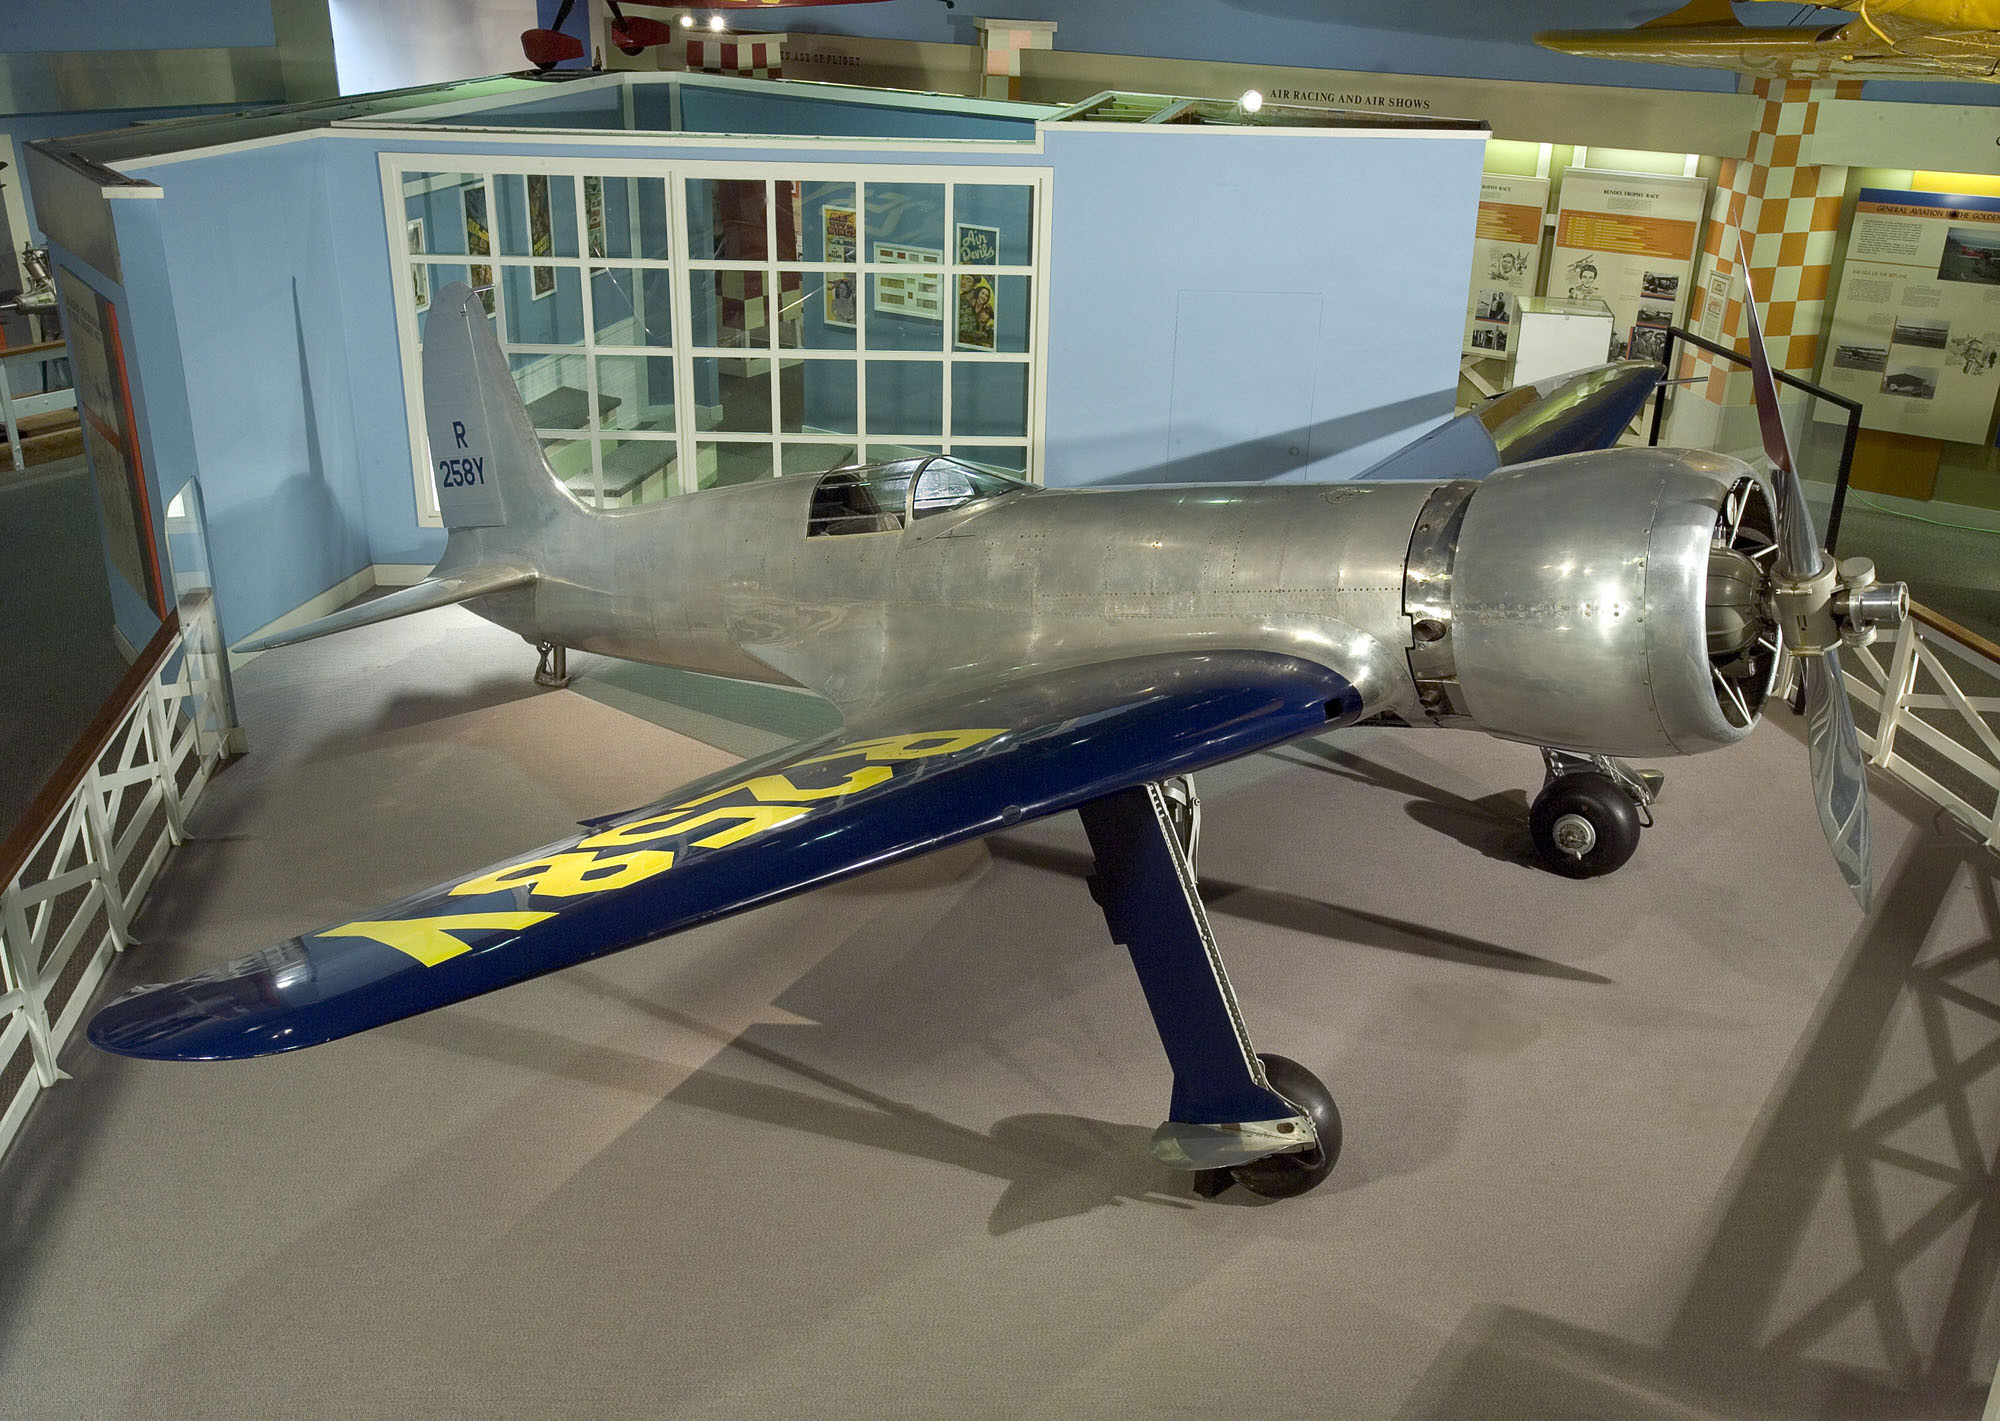 The Hughes Aircraft Co. H-1 Racer, NR258Y at the Smithsonian Institution National Air and Space Museum. (NASM)